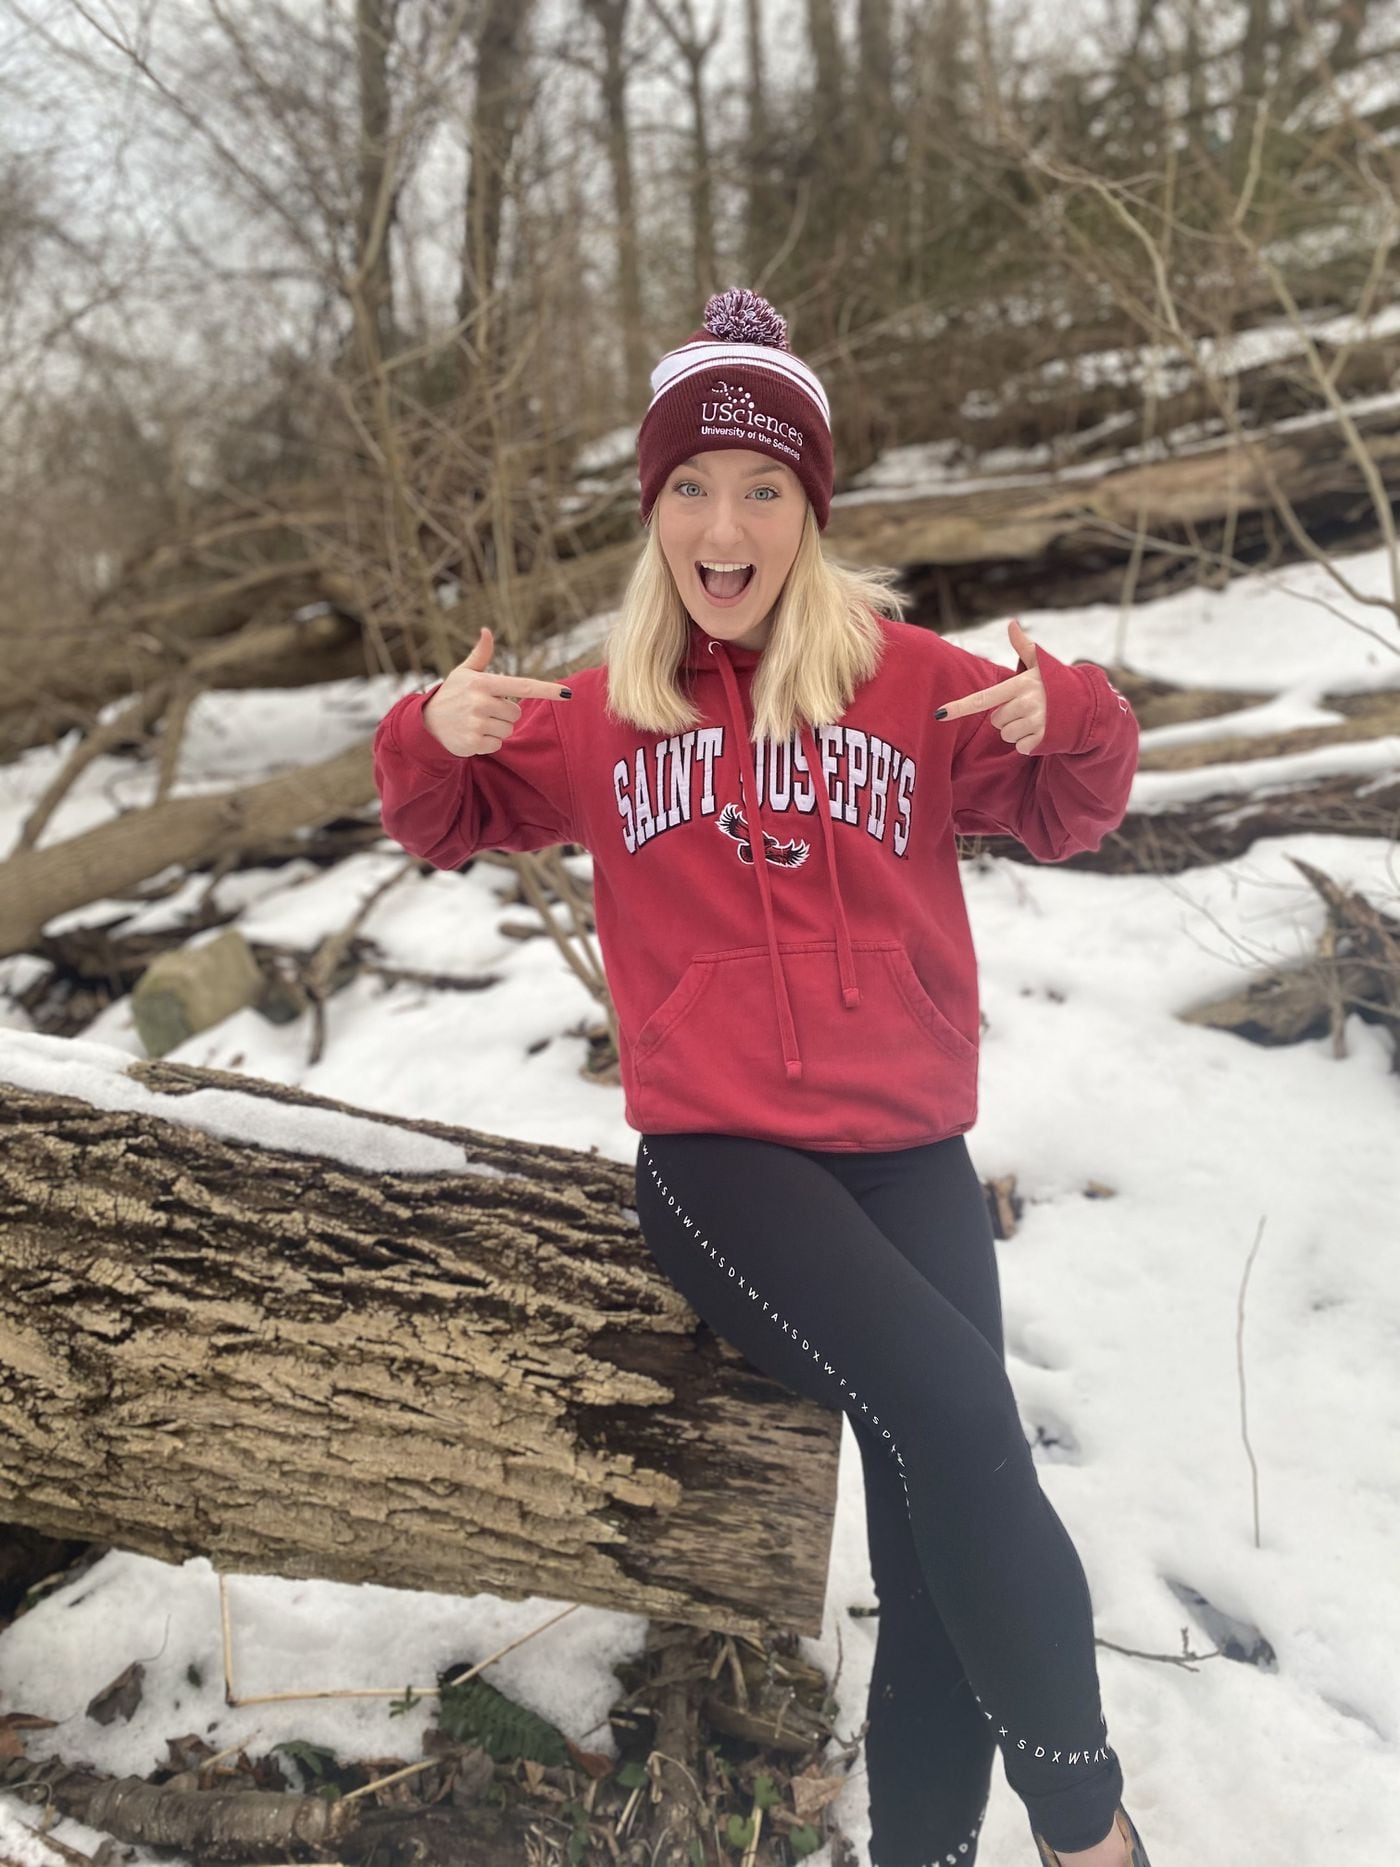 Jayna Suter, a senior at the University of the Sciences, wears a St. Joseph's University sweatshirt and USciences hat after learning about the proposed merger between the two universities.